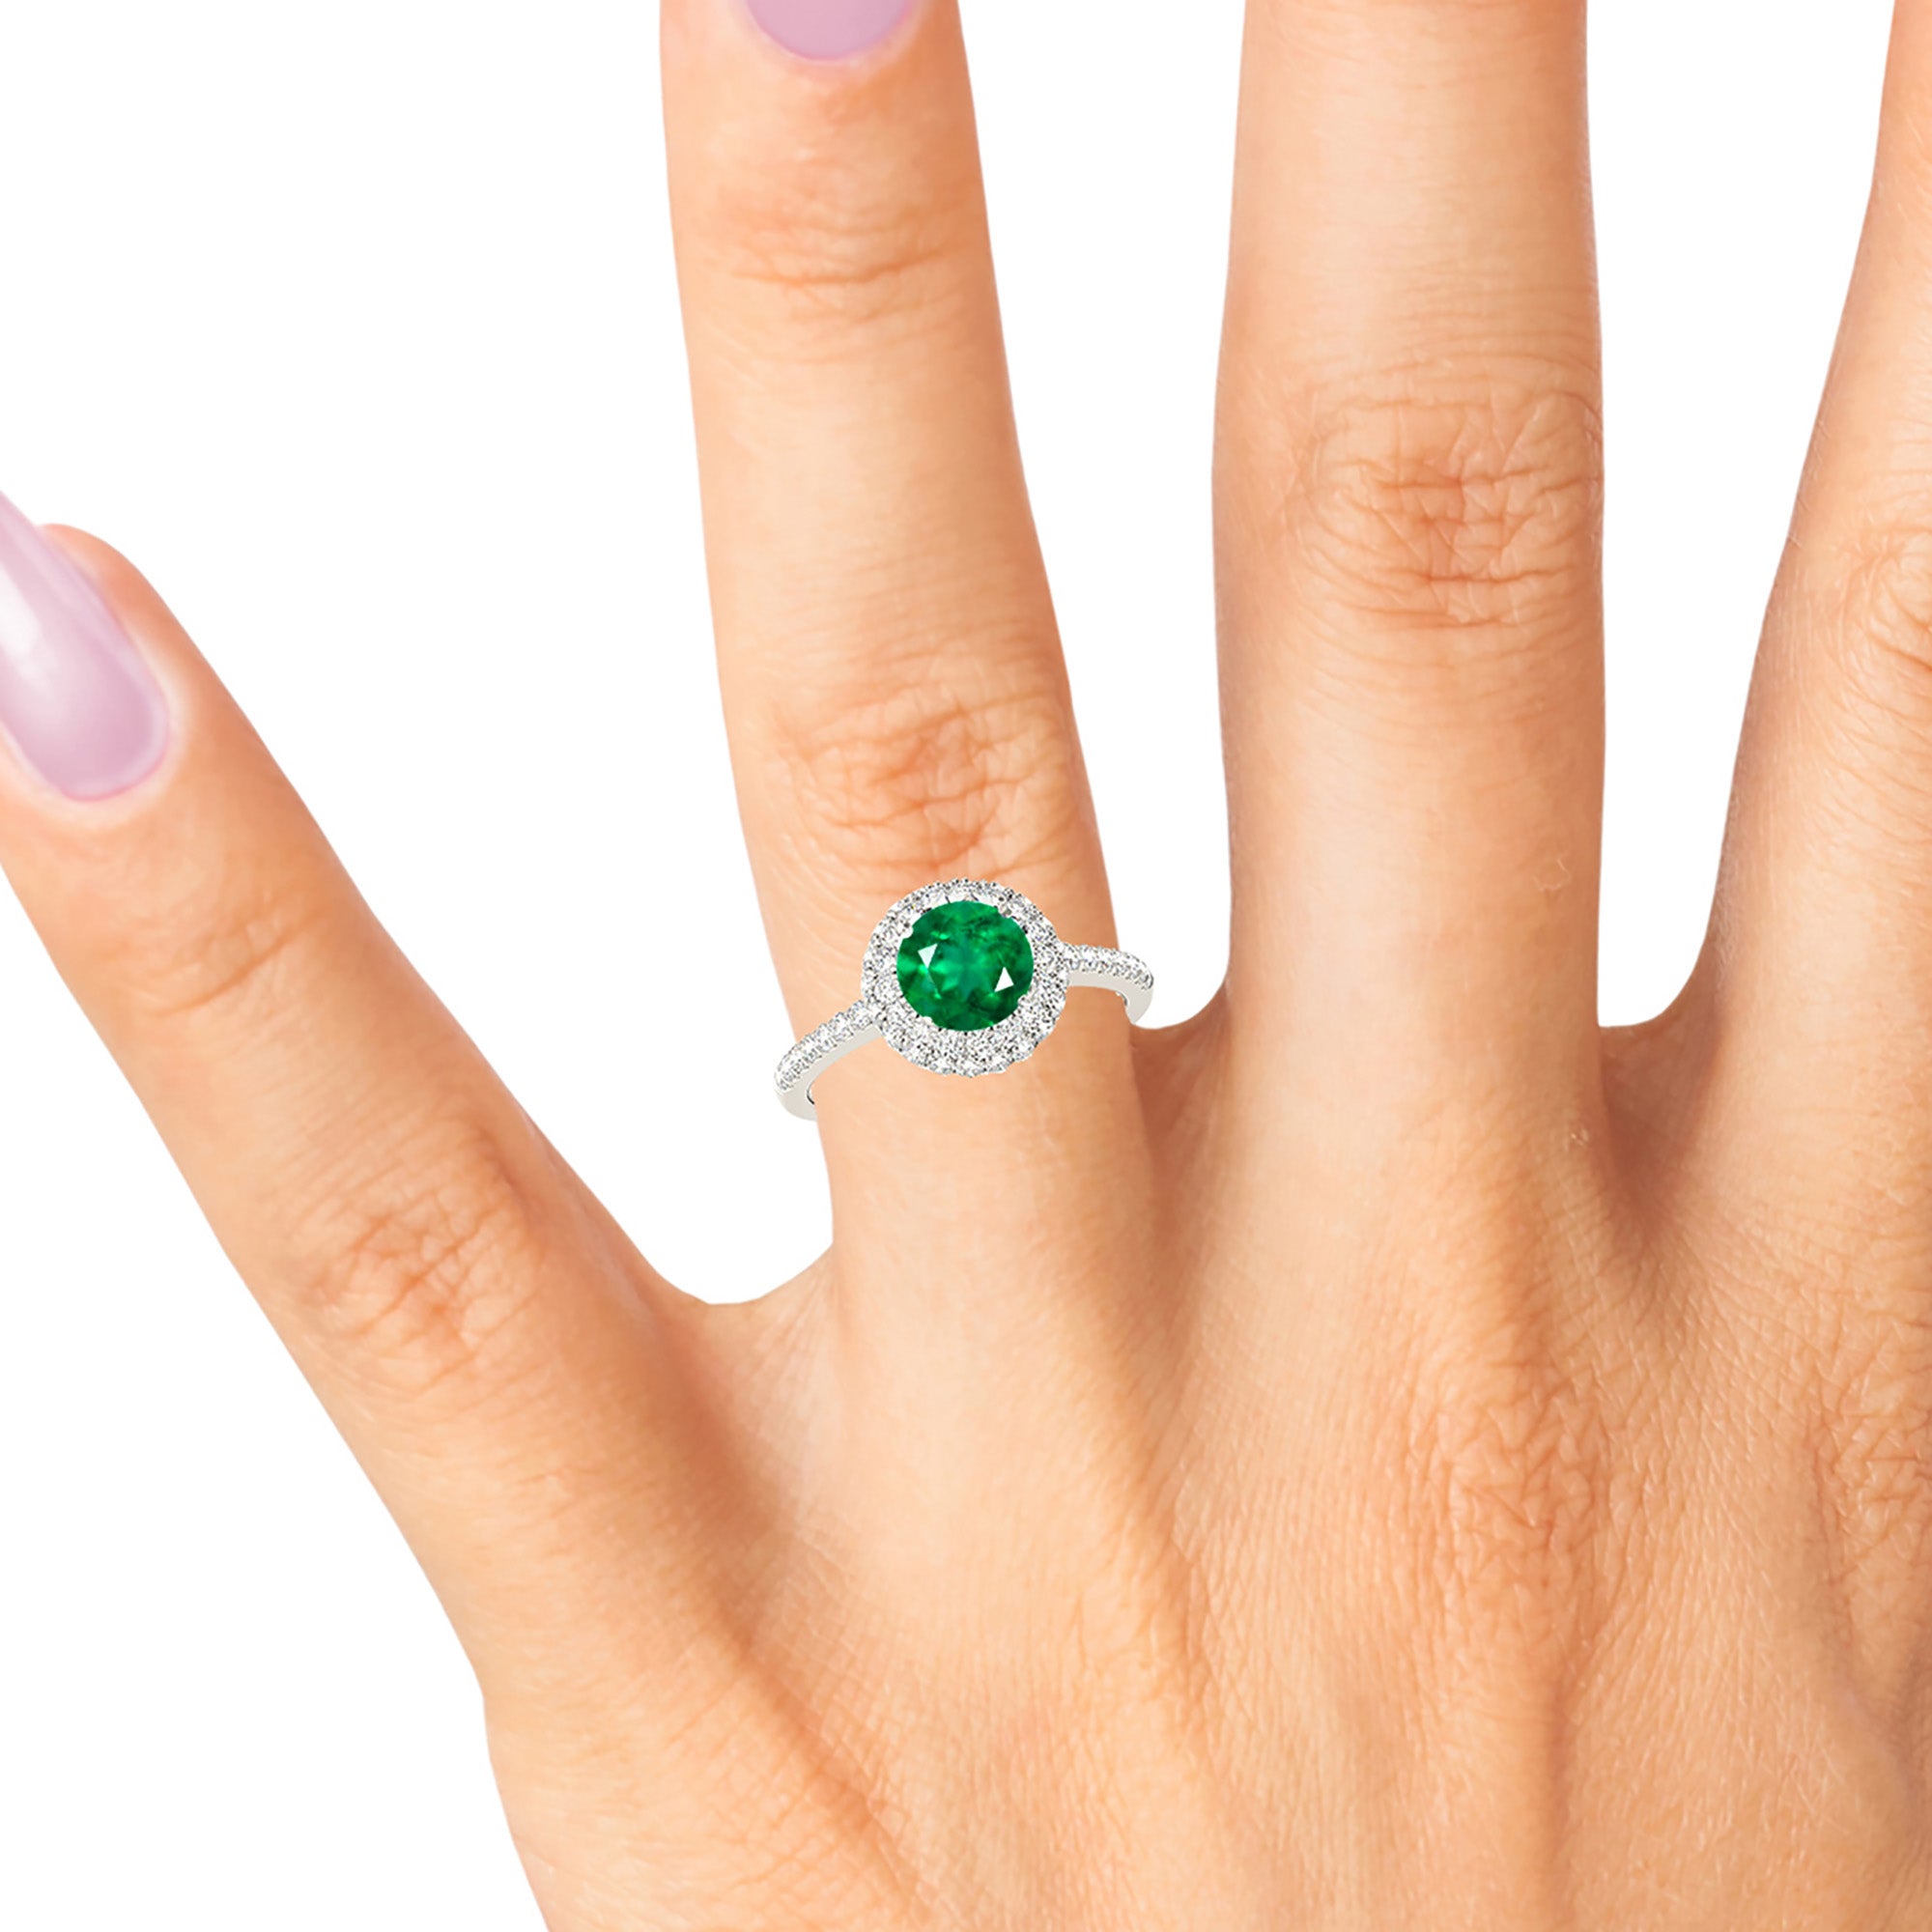 1.14 ct. Genuine Emerald Ring With 0.50 ctw. Diamond Halo And Delicate Diamond Band-in 14K/18K White, Yellow, Rose Gold and Platinum - Christmas Jewelry Gift -VIRABYANI